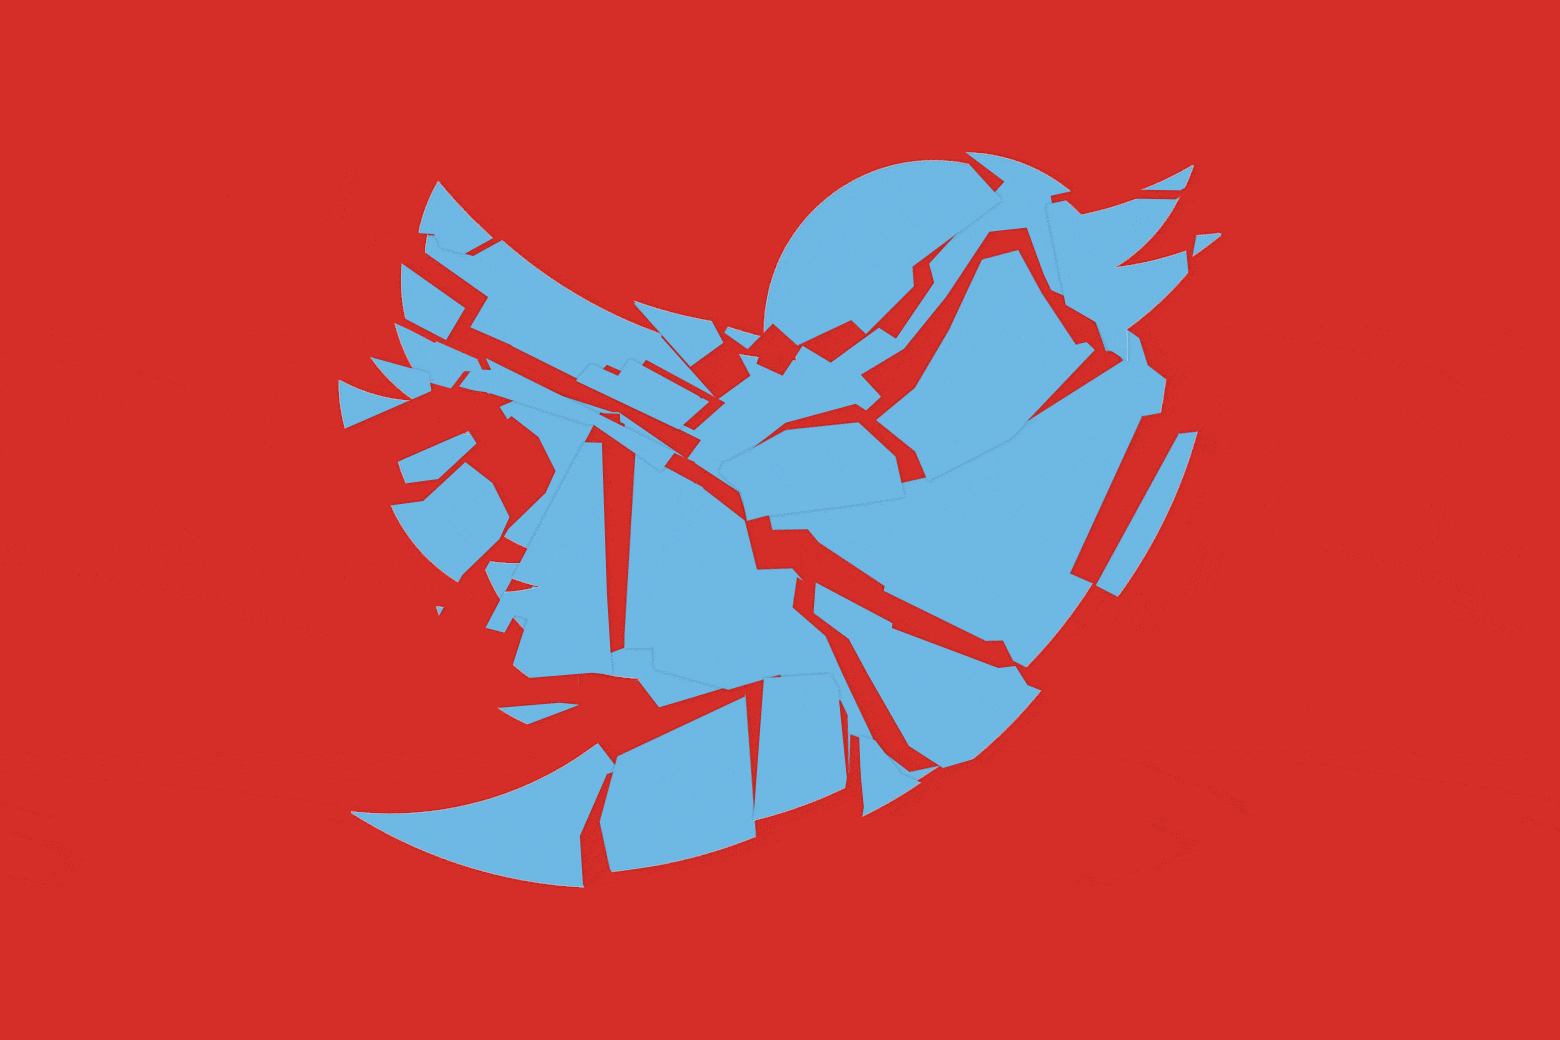 Twitter bird logo cracked into many pieces with squares of blue taking over squares of red